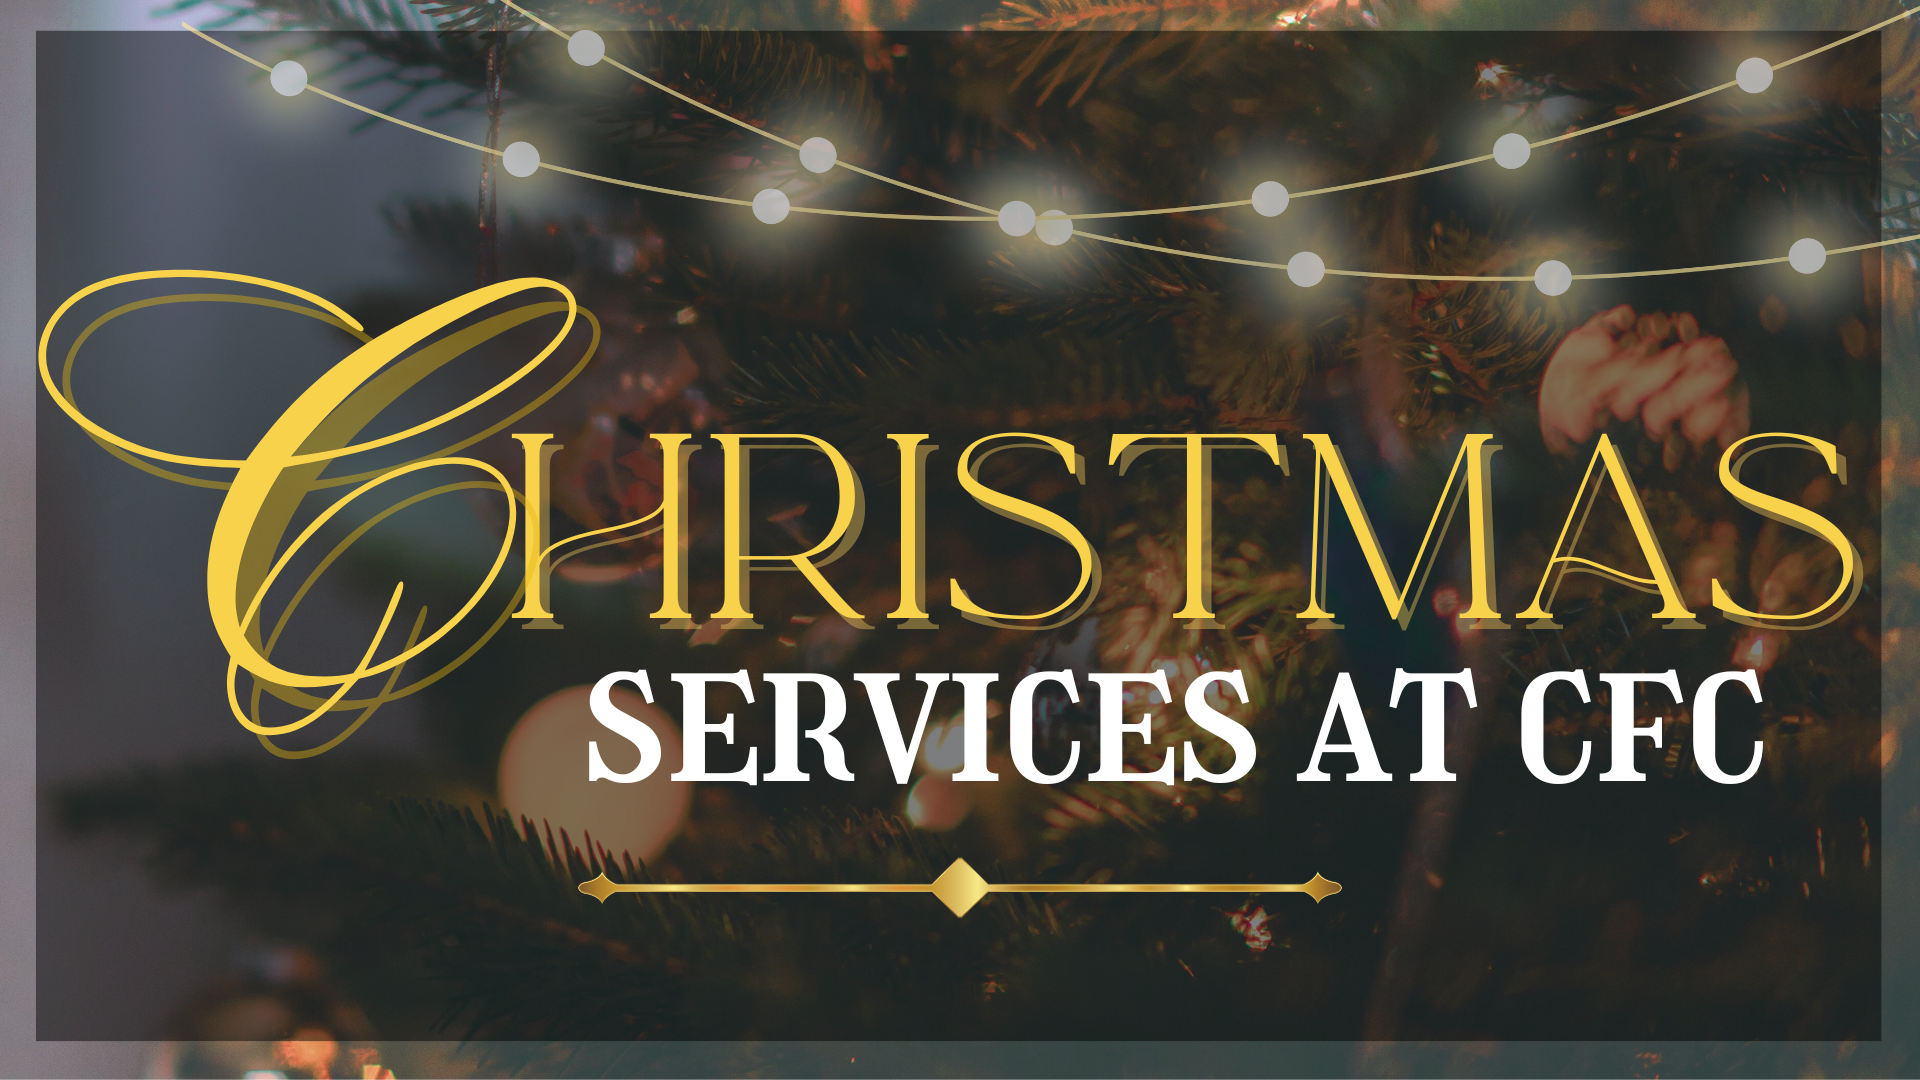 Copy of Christmas Services image